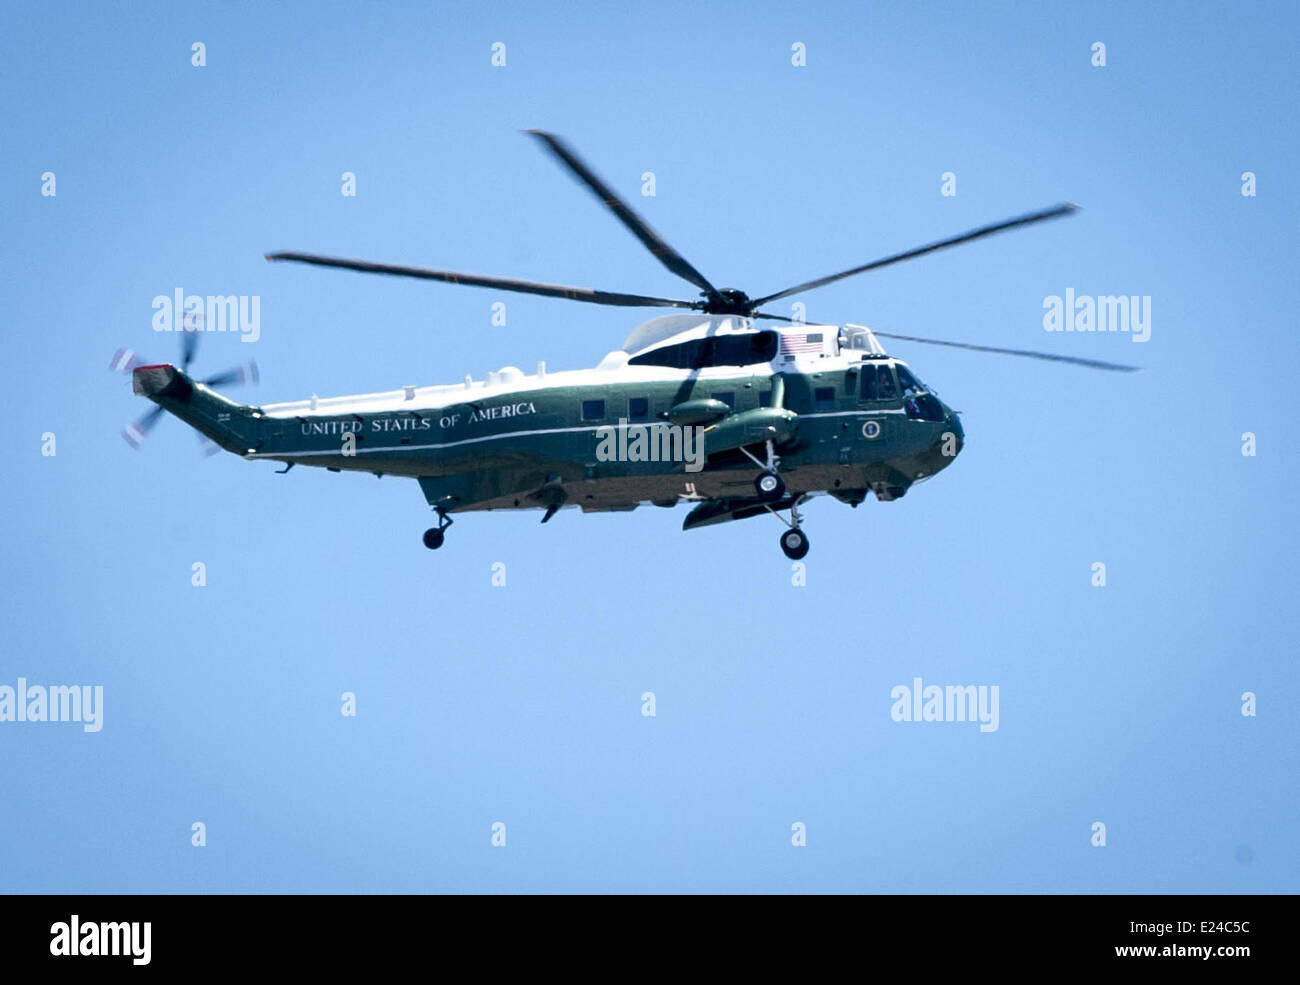 Anaheim, California, USA. 13th June, 2014. A Sikorsky SH-3 Sea King Helicopter designated as Marine One with US President Obama as passenger, flies over Angel Stadium in Anaheim, California, on June 14, 2014. President Obama had earlier delivered a commencement speech for the graduating class from the University of California at Irvine, Class of 2014. © David Bro/ZUMAPRESS.com/Alamy Live News Stock Photo